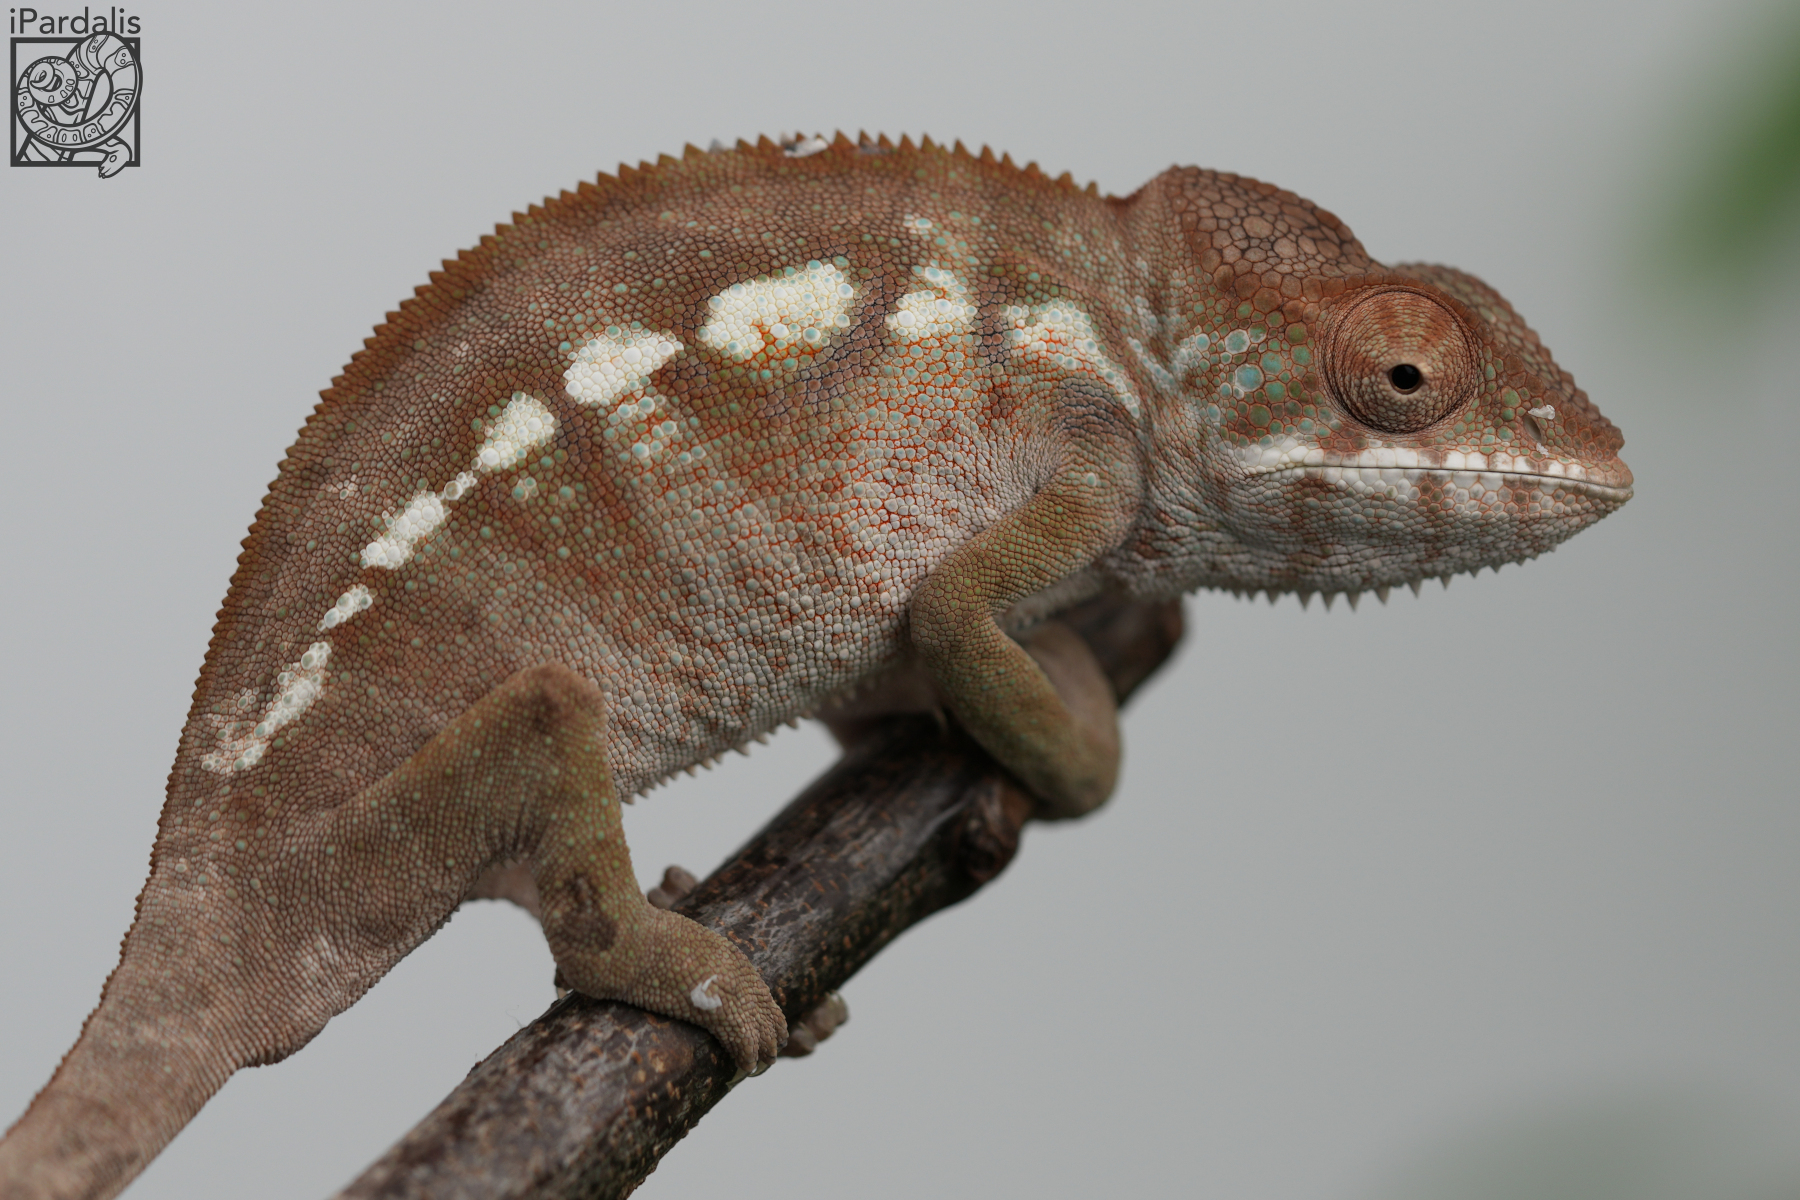 Panther Chameleon for sale: F3 - Kiborin x Maize ($299 plus shipping)